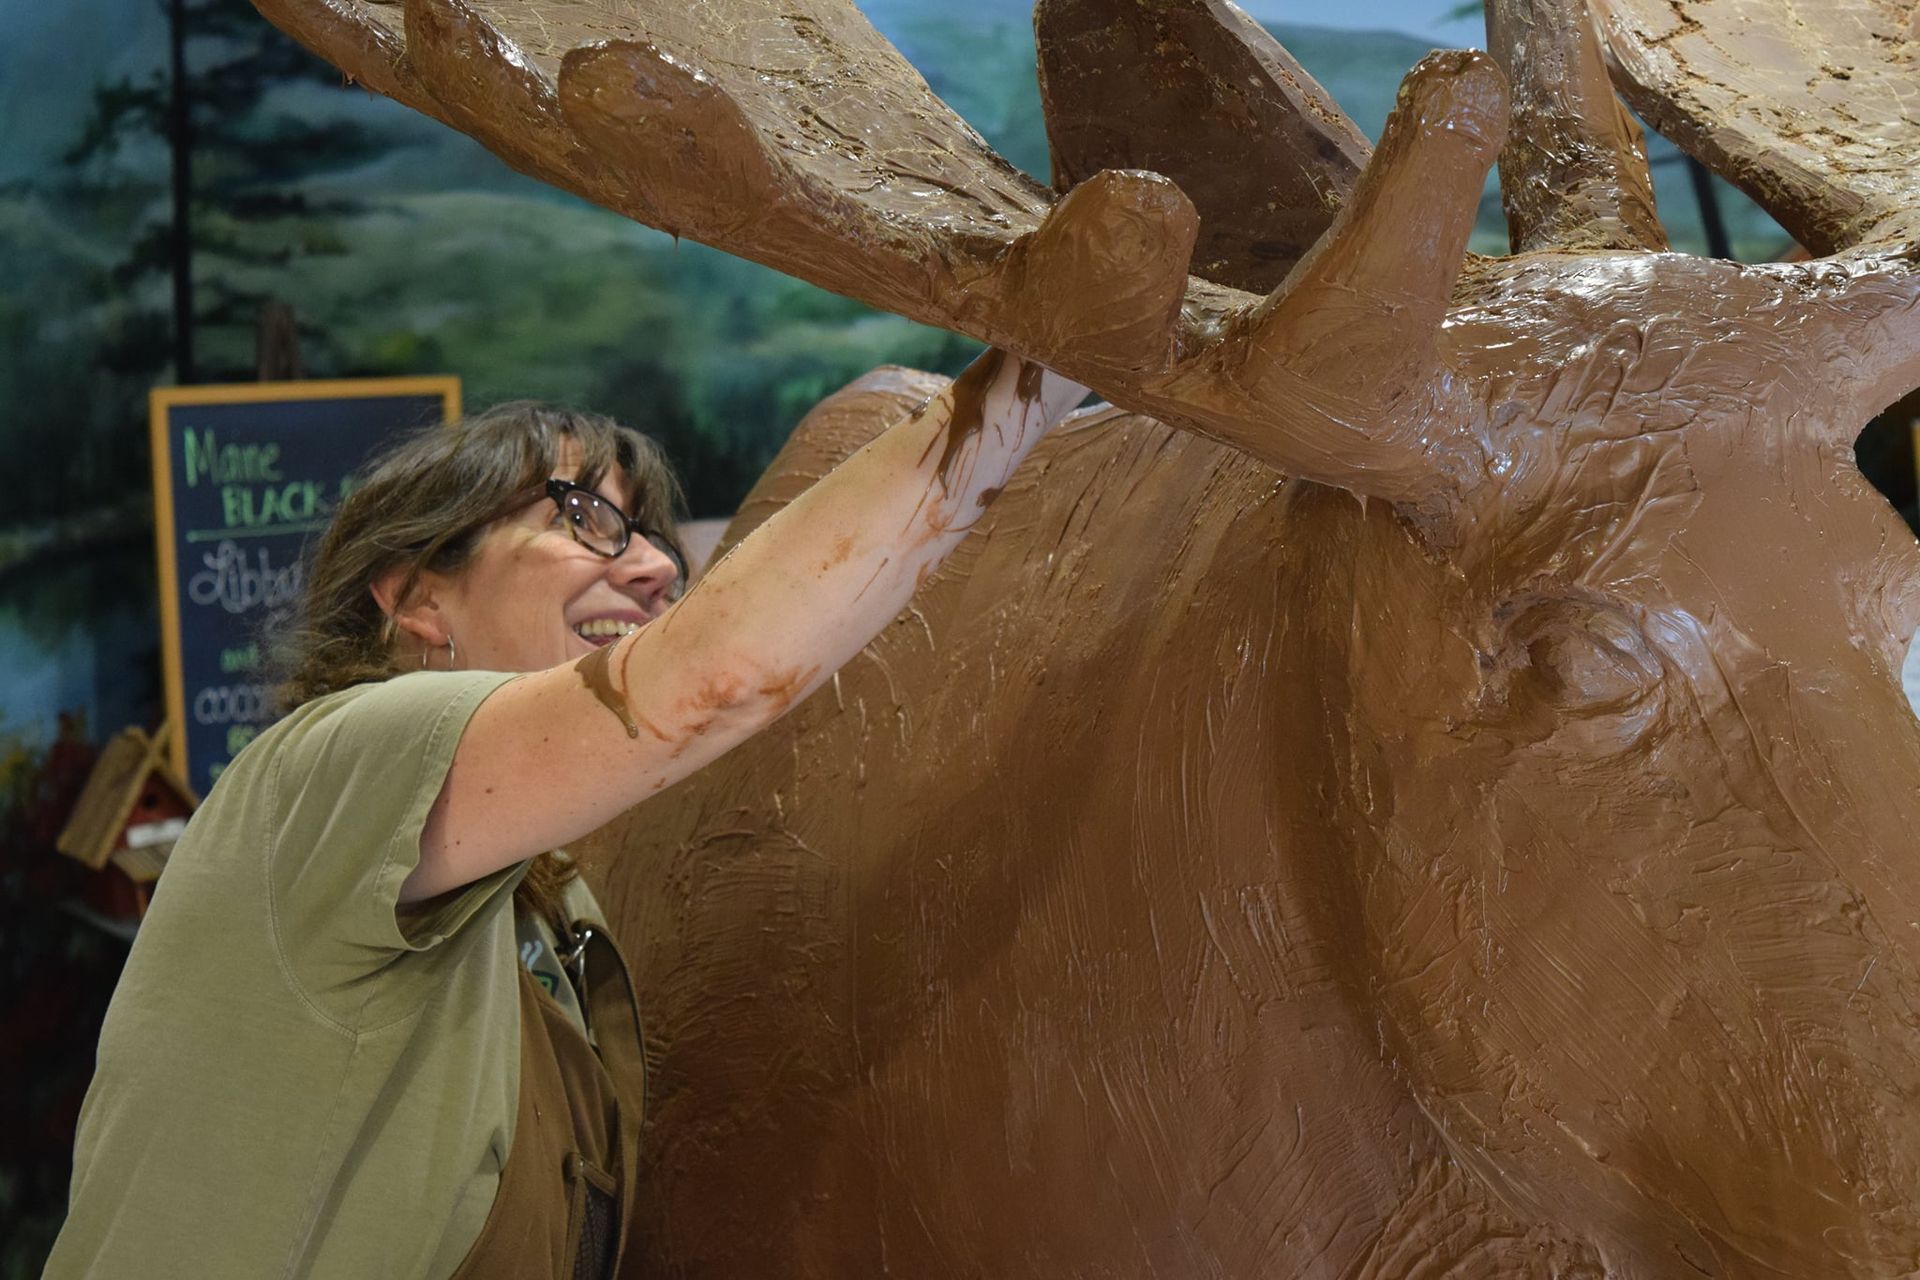 World's First Life-Size Chocolate Moose, world record in Scarborough, Maine
